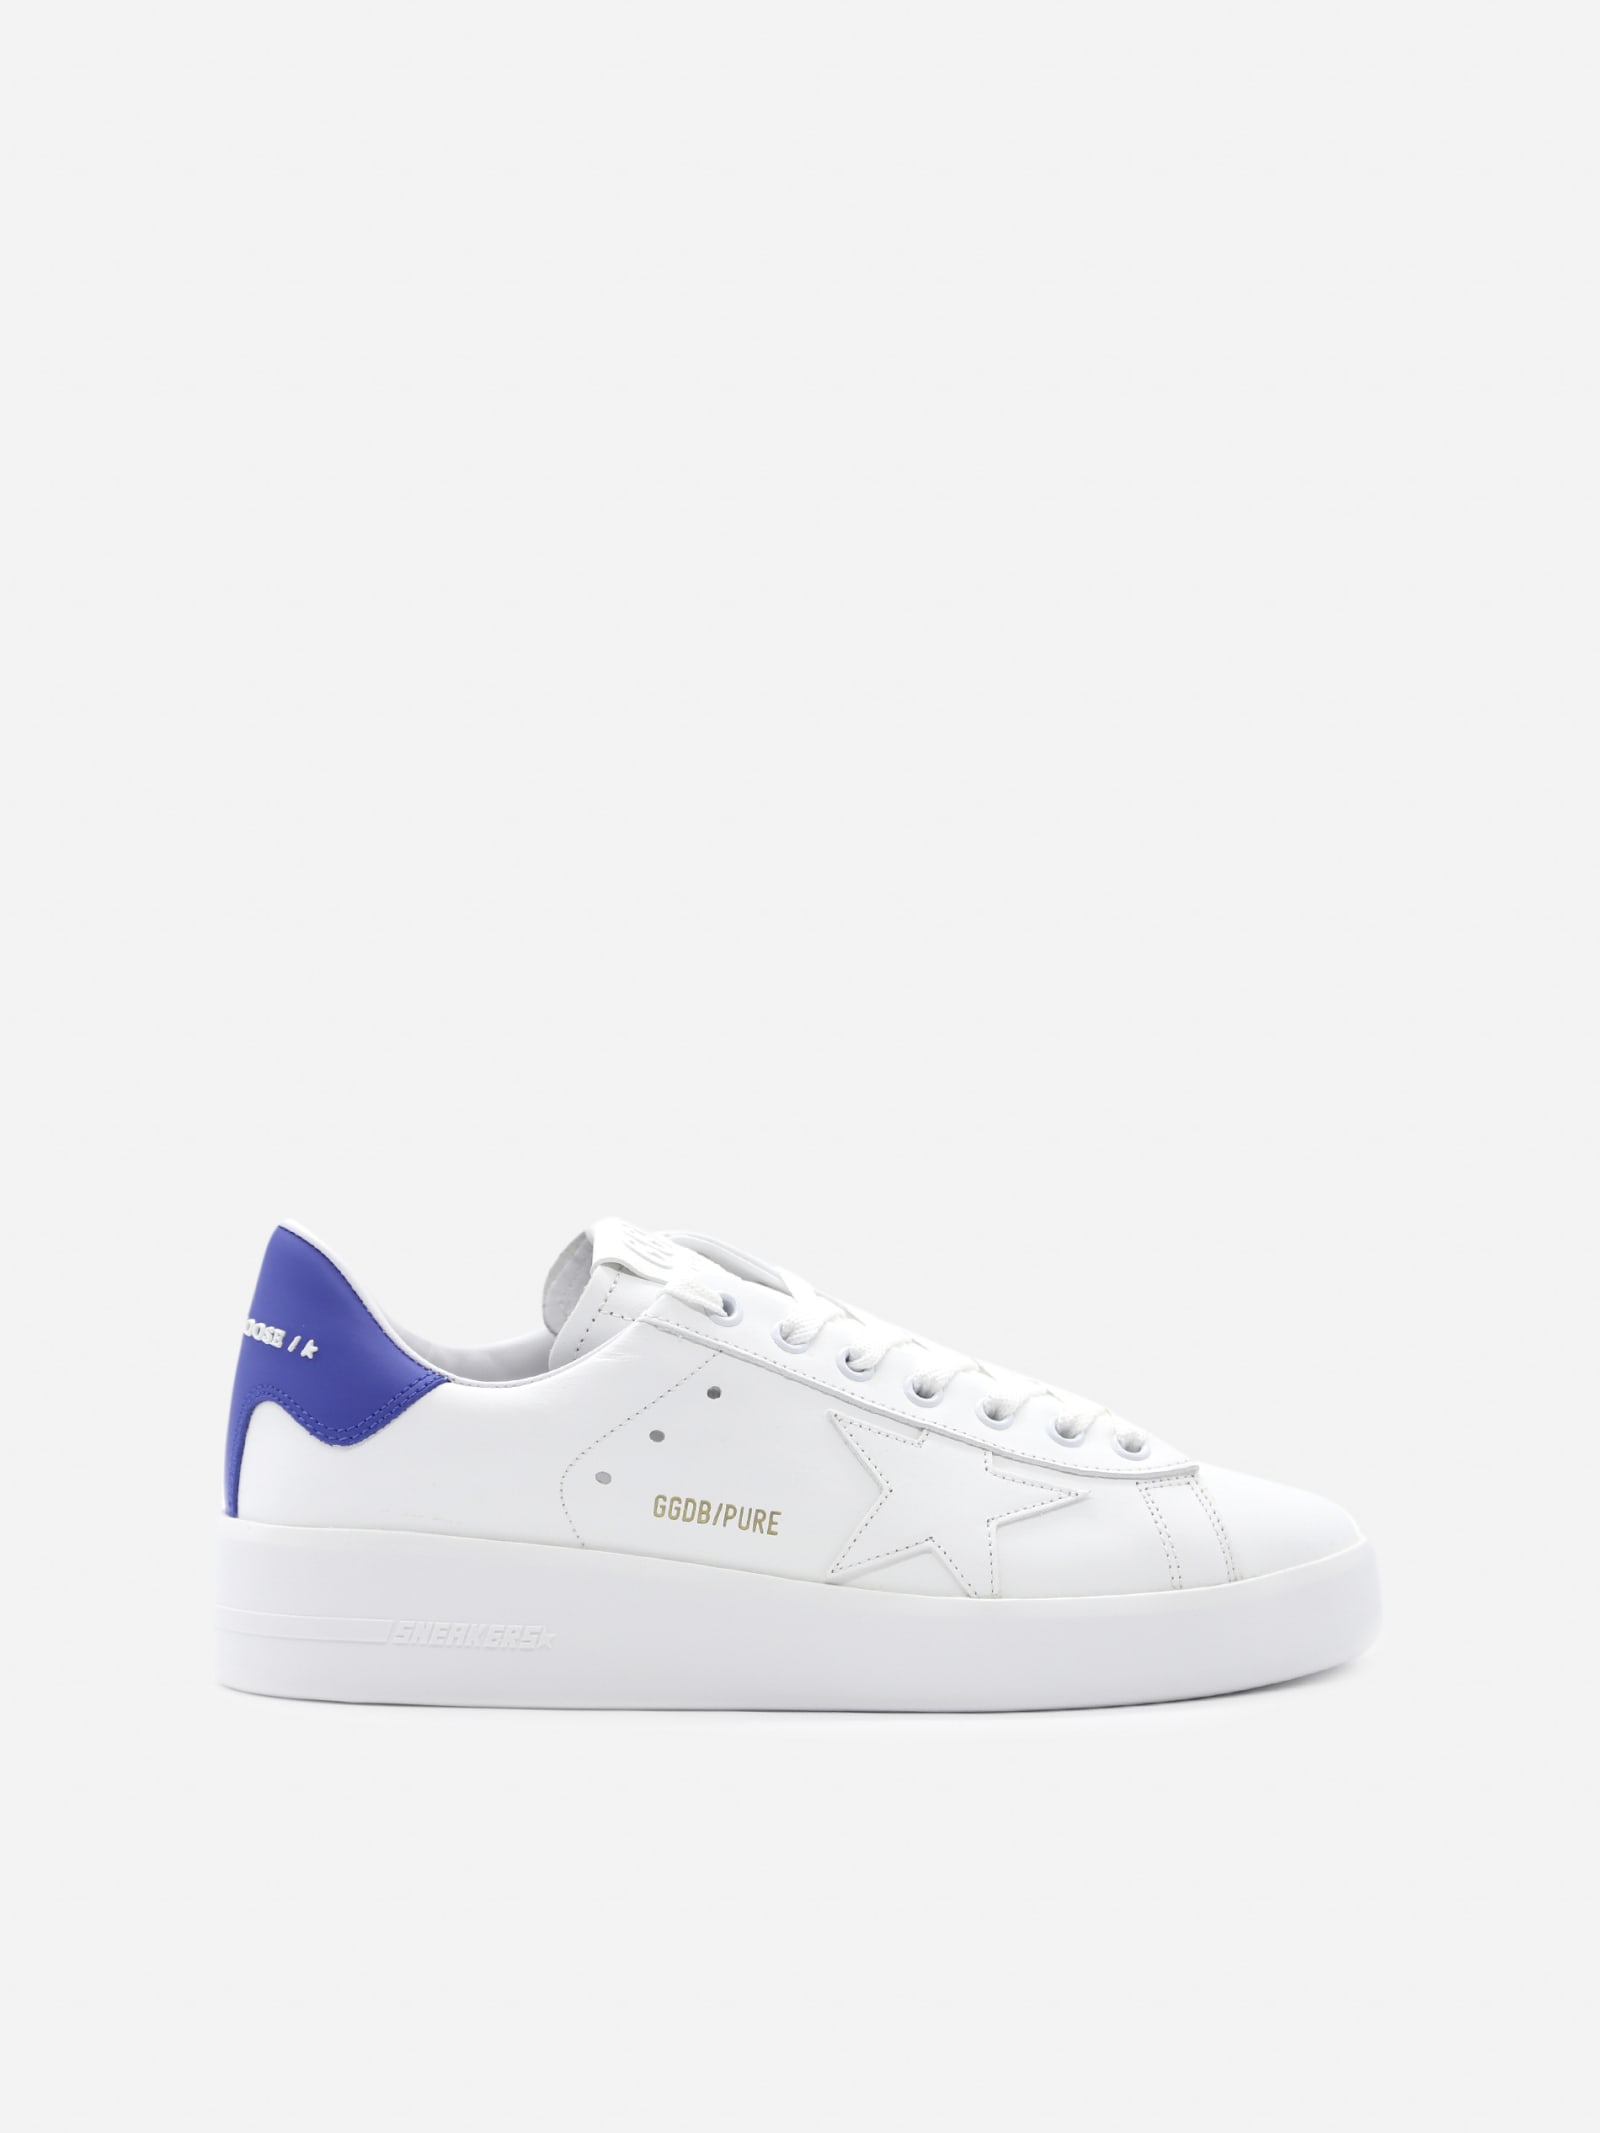 Golden Goose Purestar Sneakers In Leather With Contrasting Heel Tab